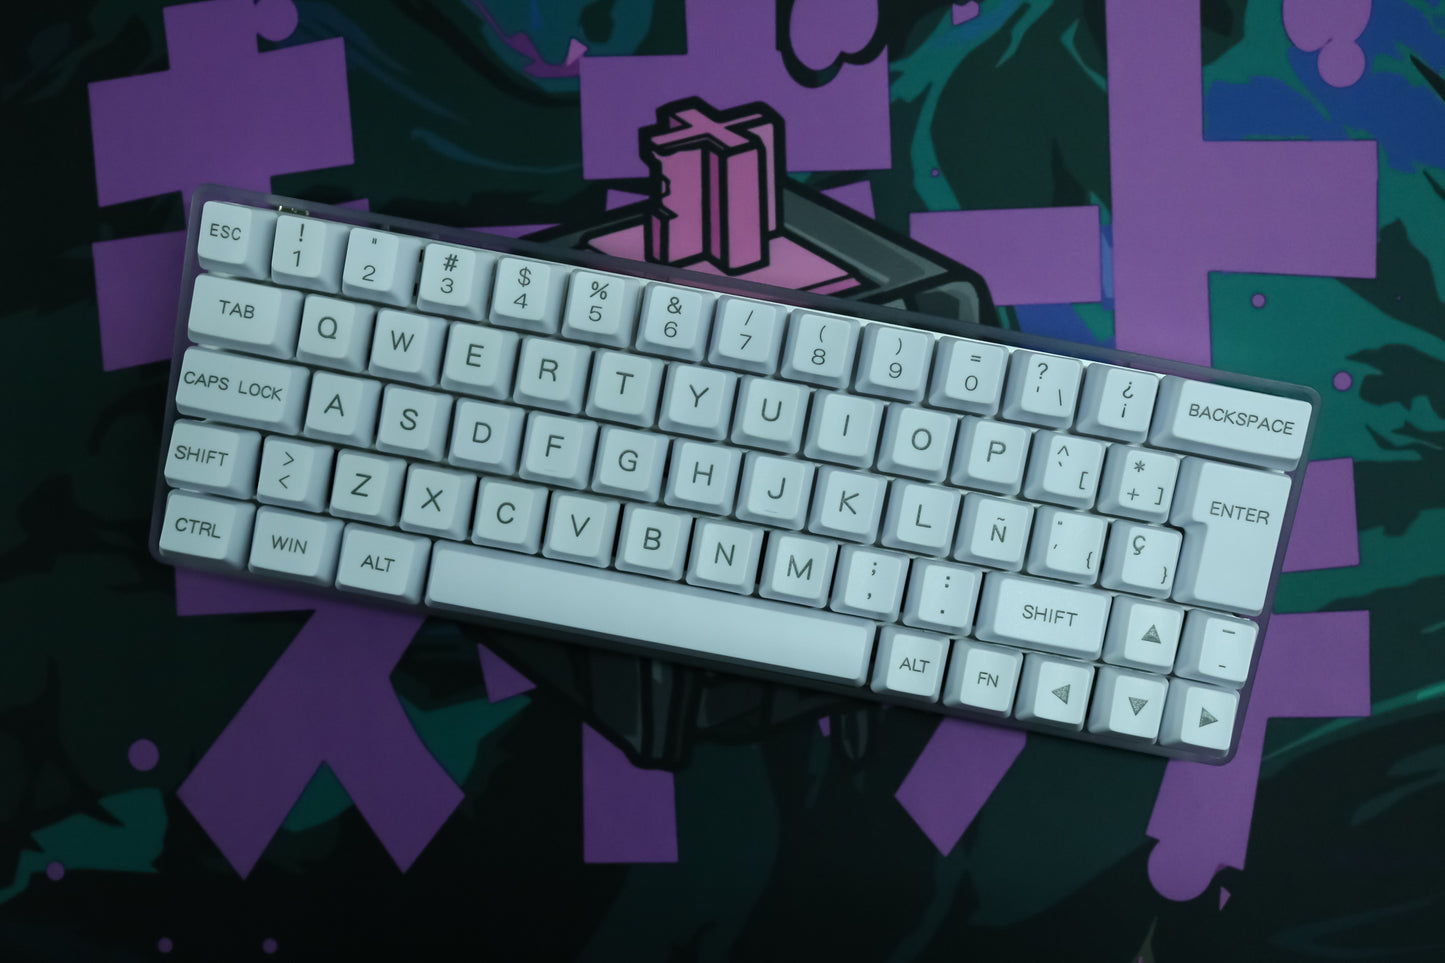 DE64W WITH FULL WHITE ISO ES / ASSEMBLED 60% MECHANICAL KEYBOARD